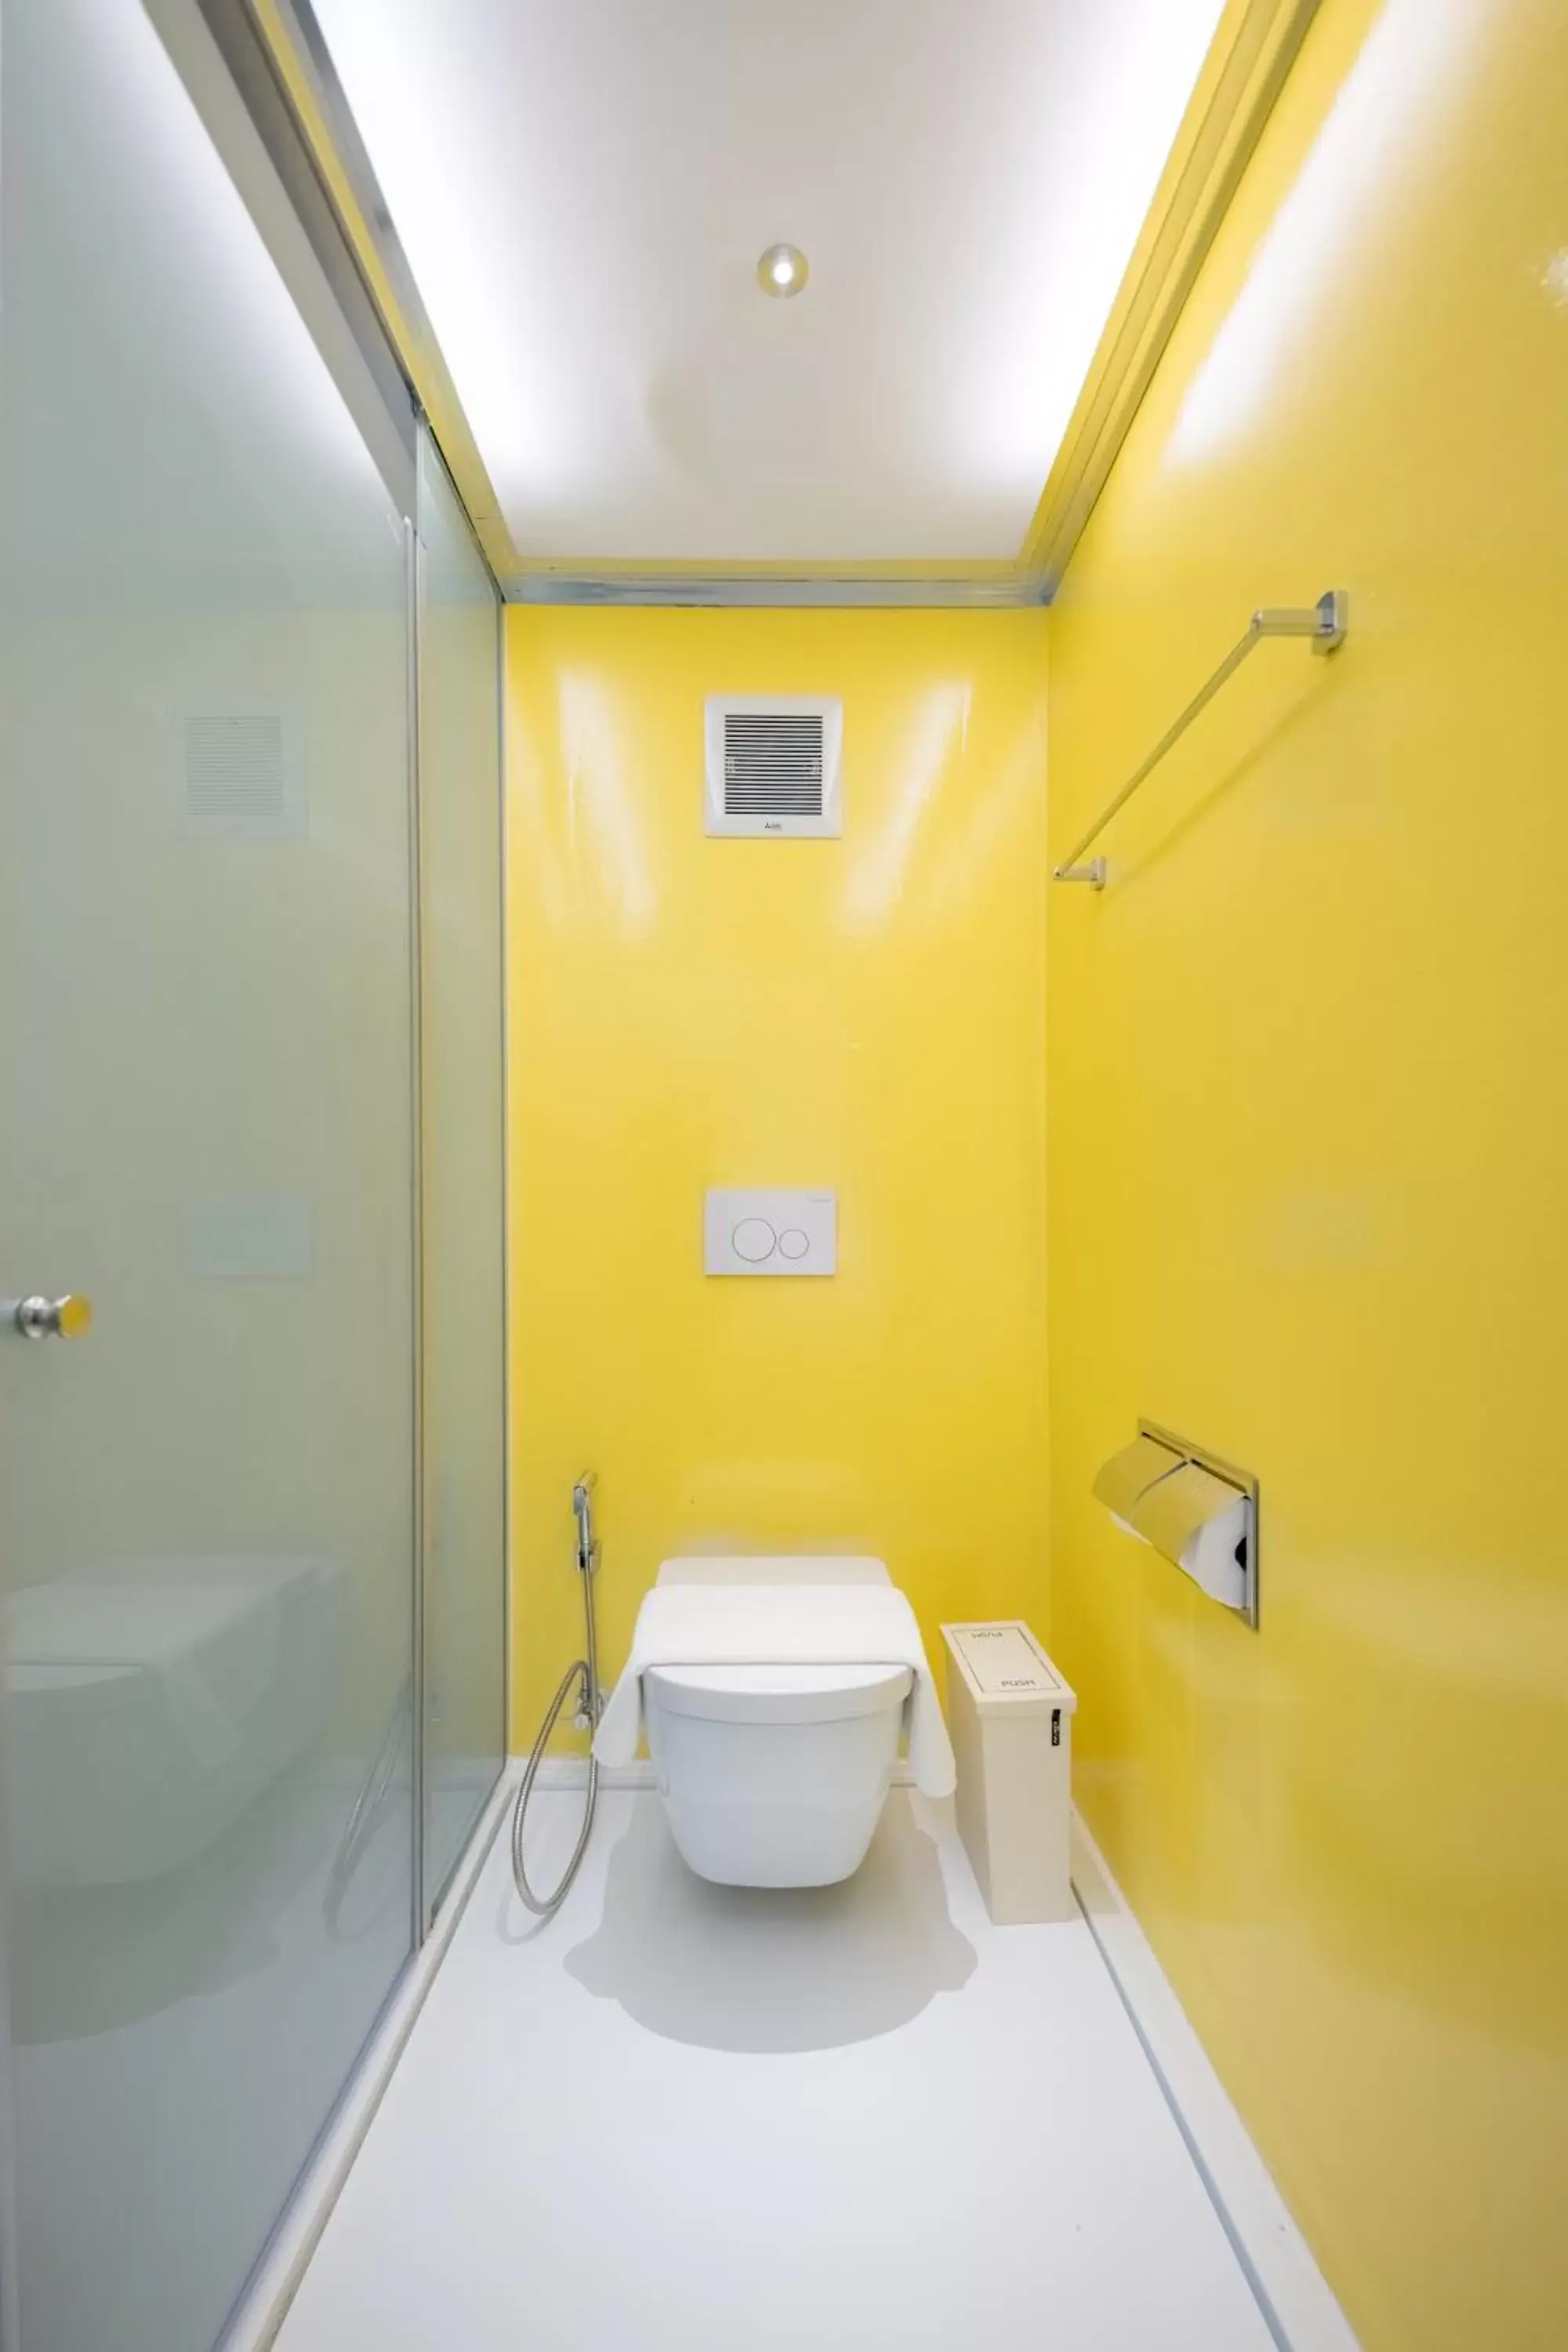 Toilet, Bathroom in Yello Rooms Hotel Victory Monument